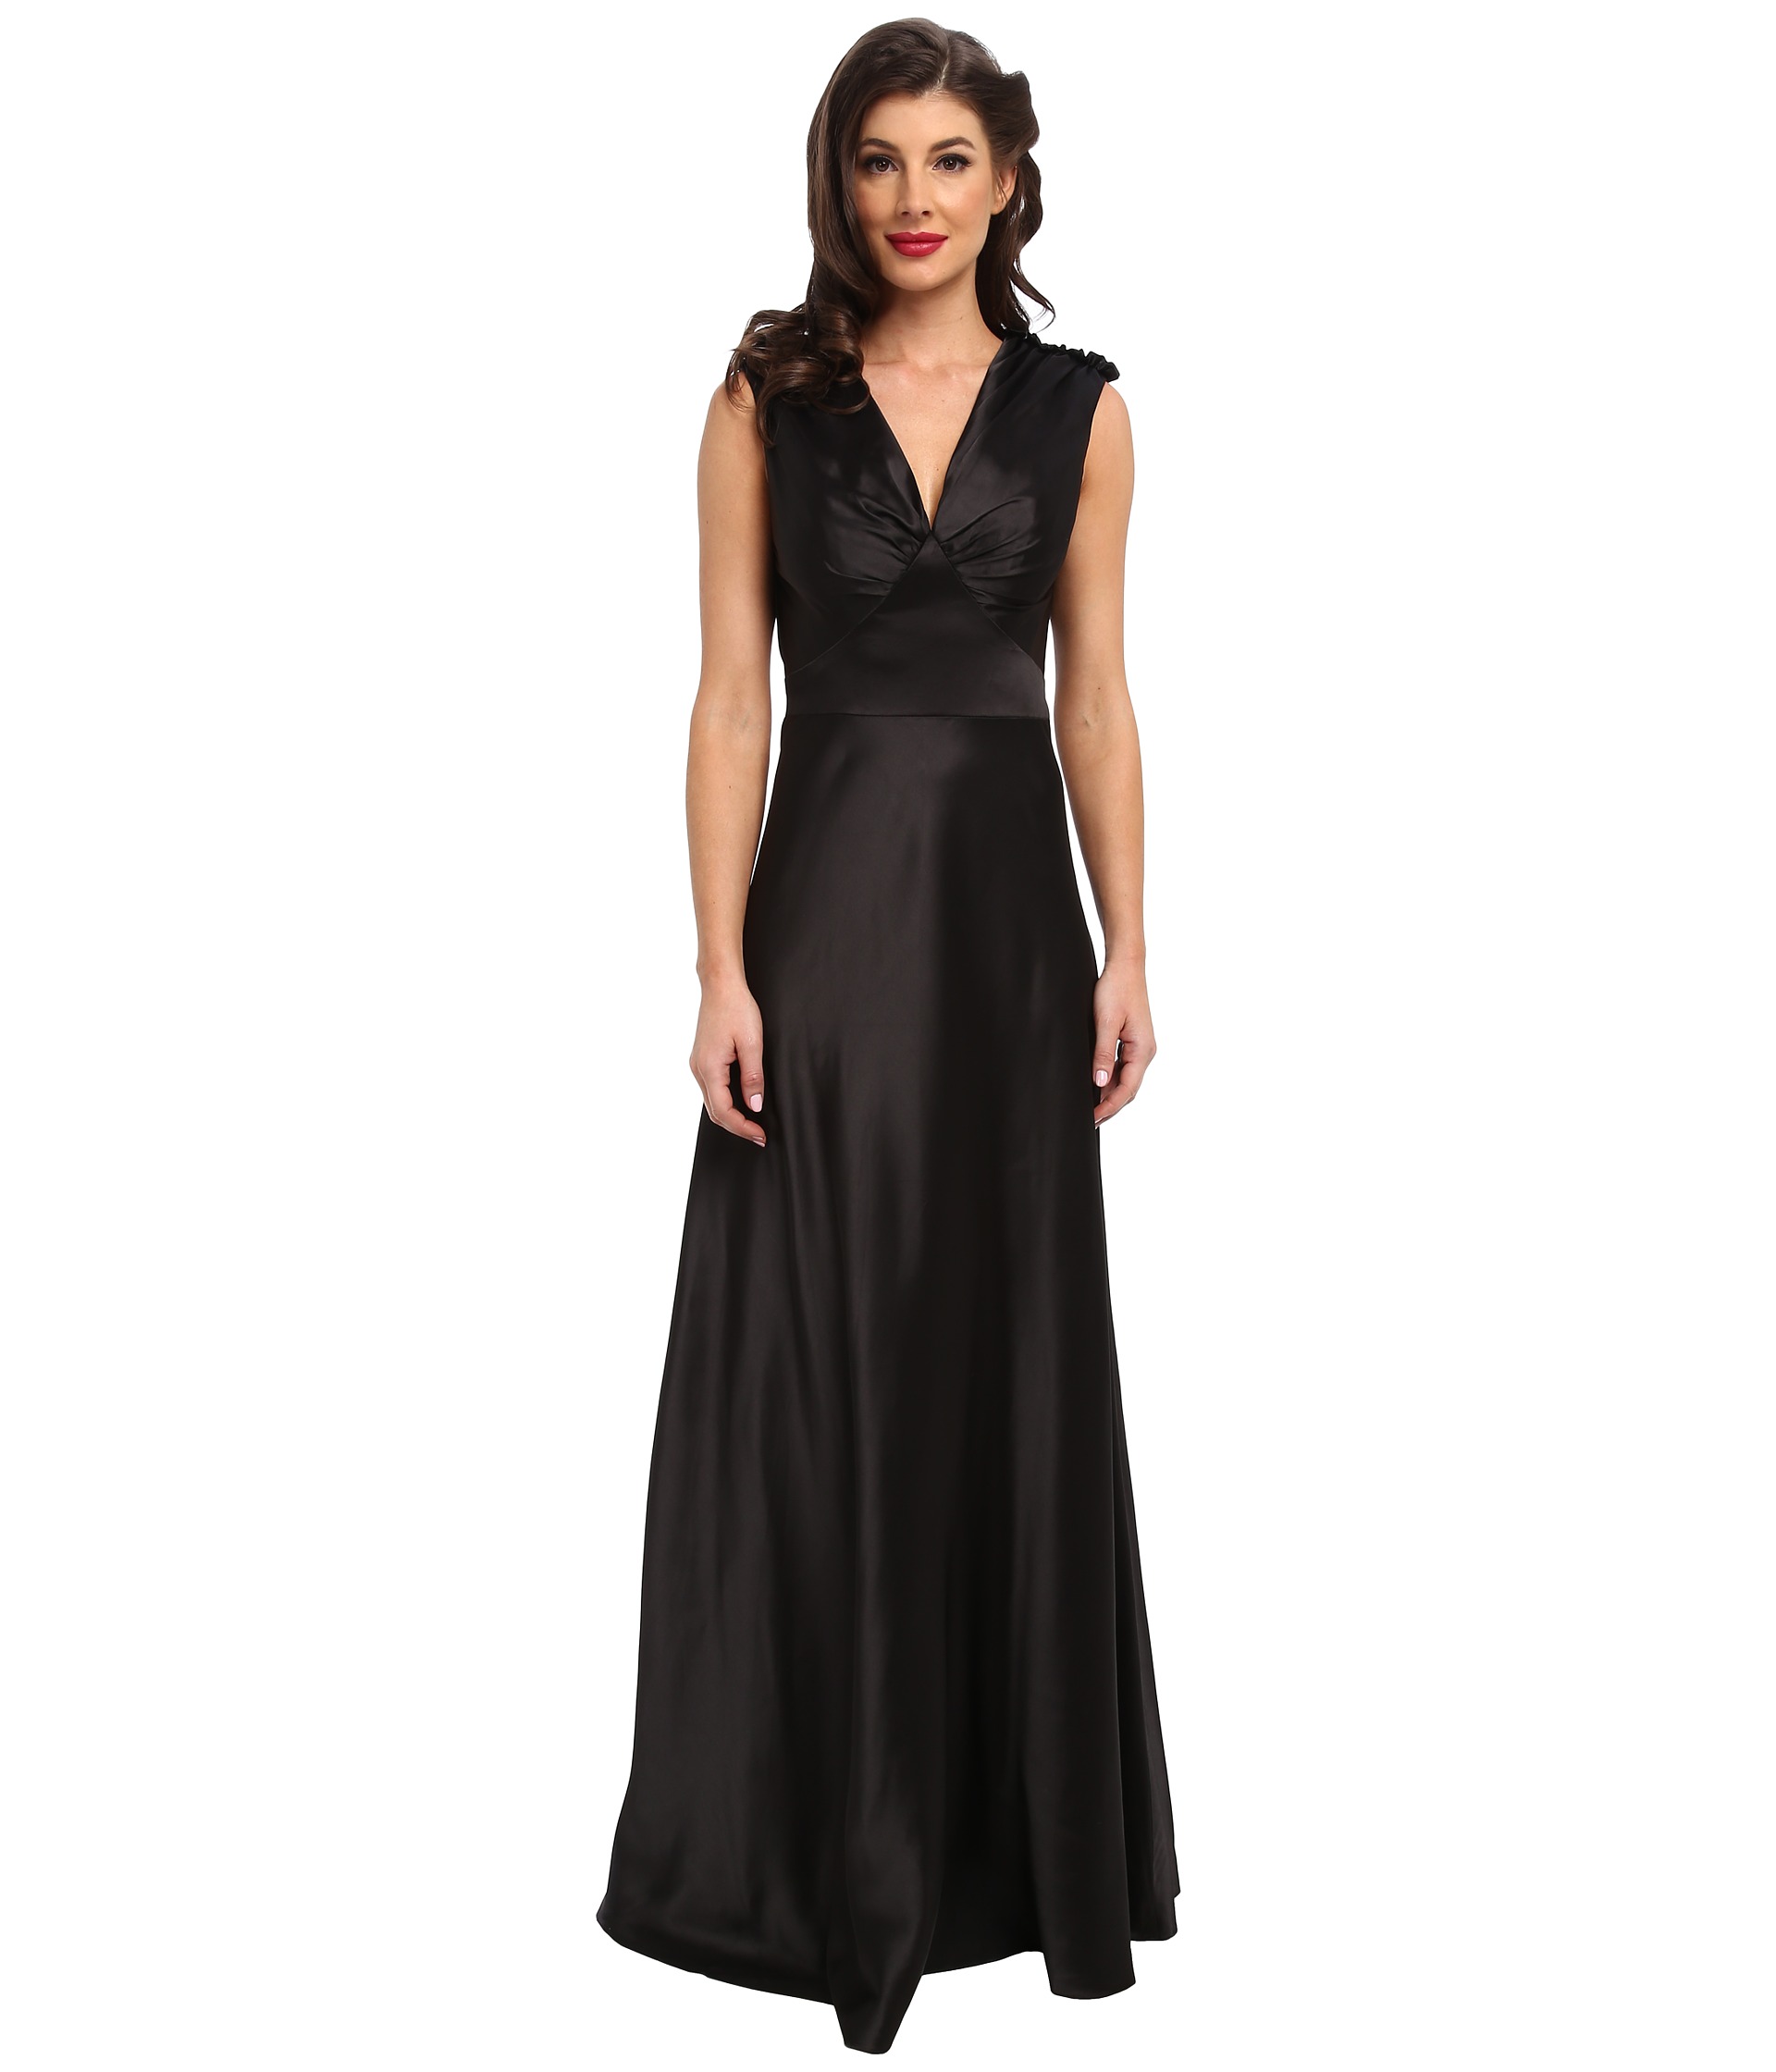 Unique Vintage 1930s Style Satin Harlow Gown Black | Shipped Free at Zappos